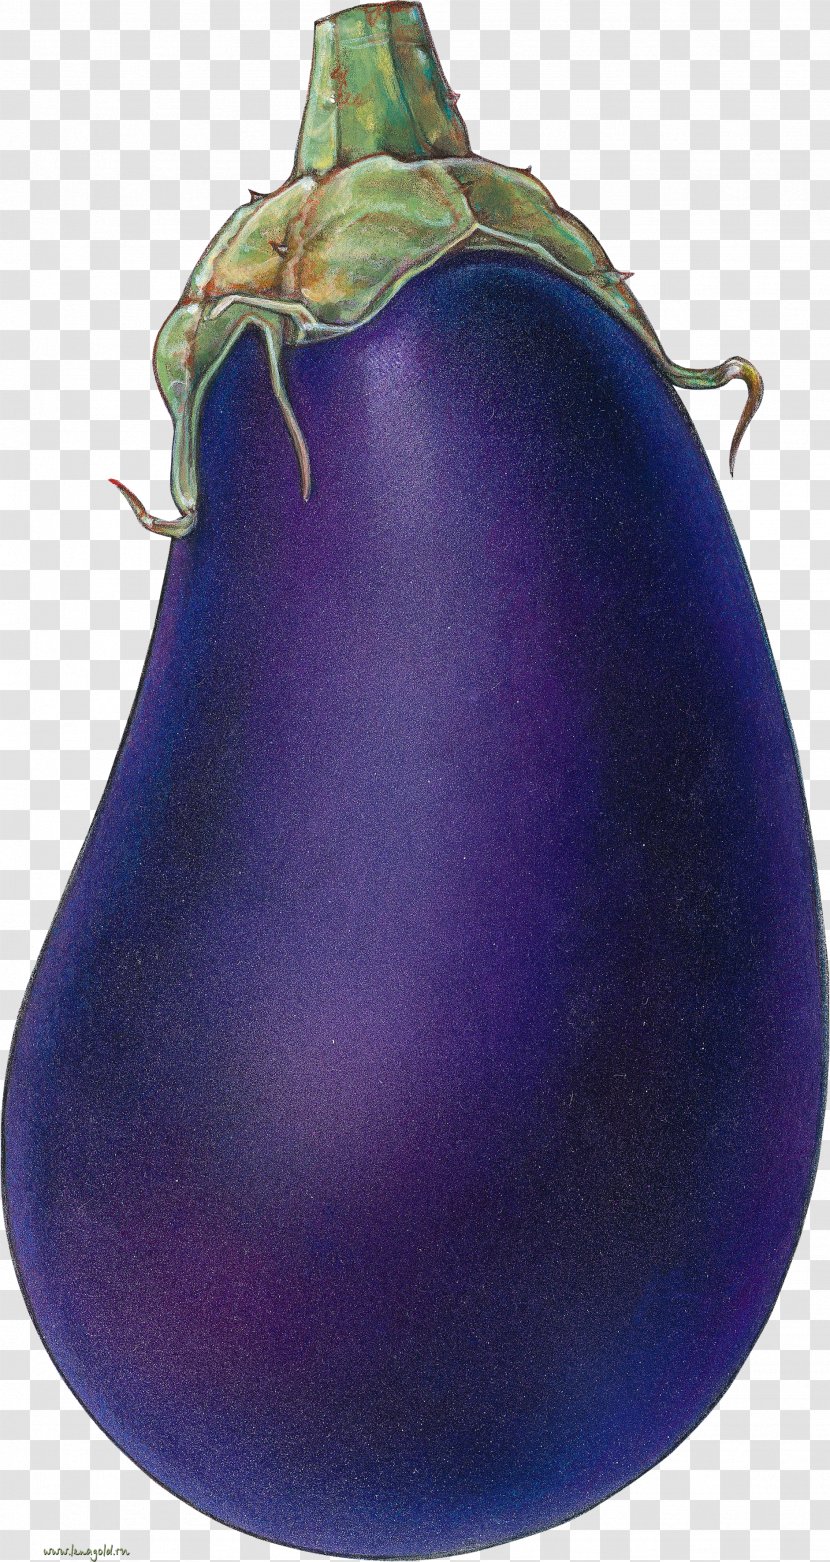 Fruit Vegetable Eggplant Painting Drawing Transparent PNG